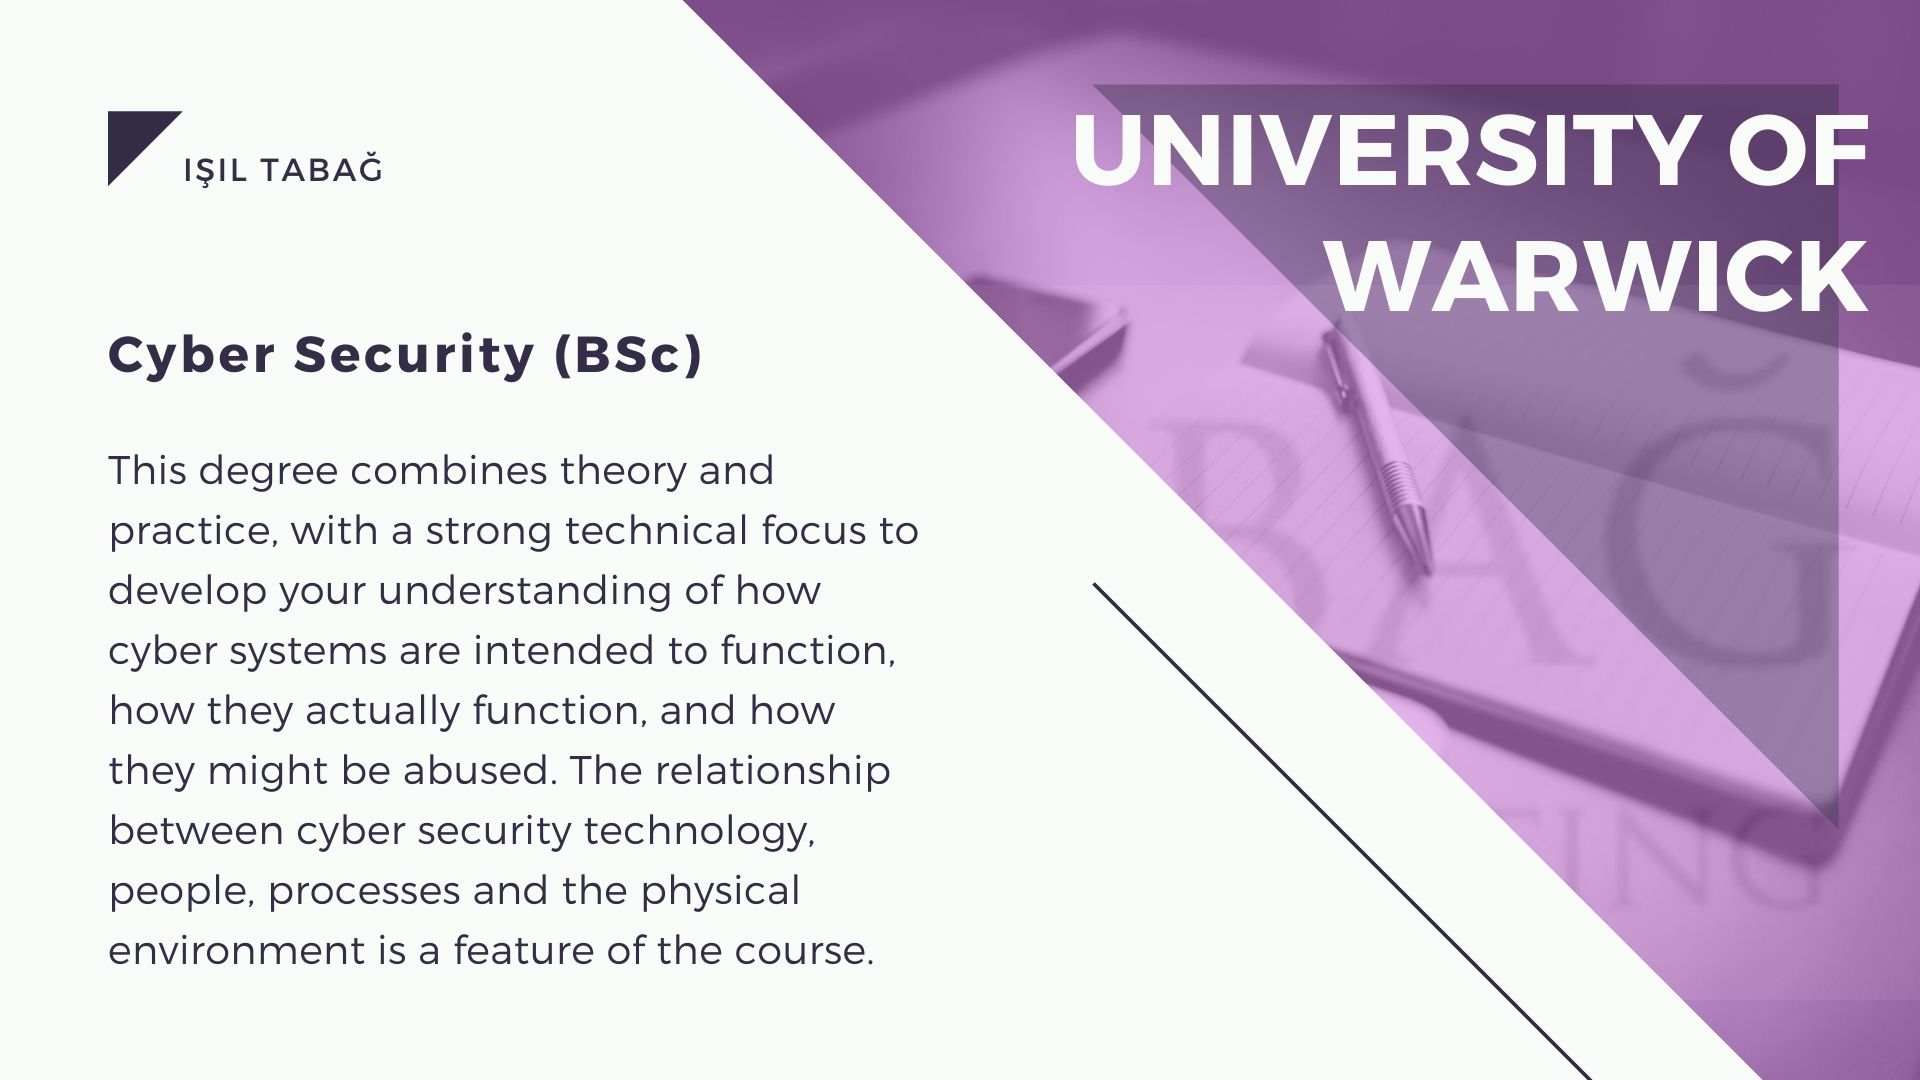 University Of Warwick Cyber Security - Isil Tabag